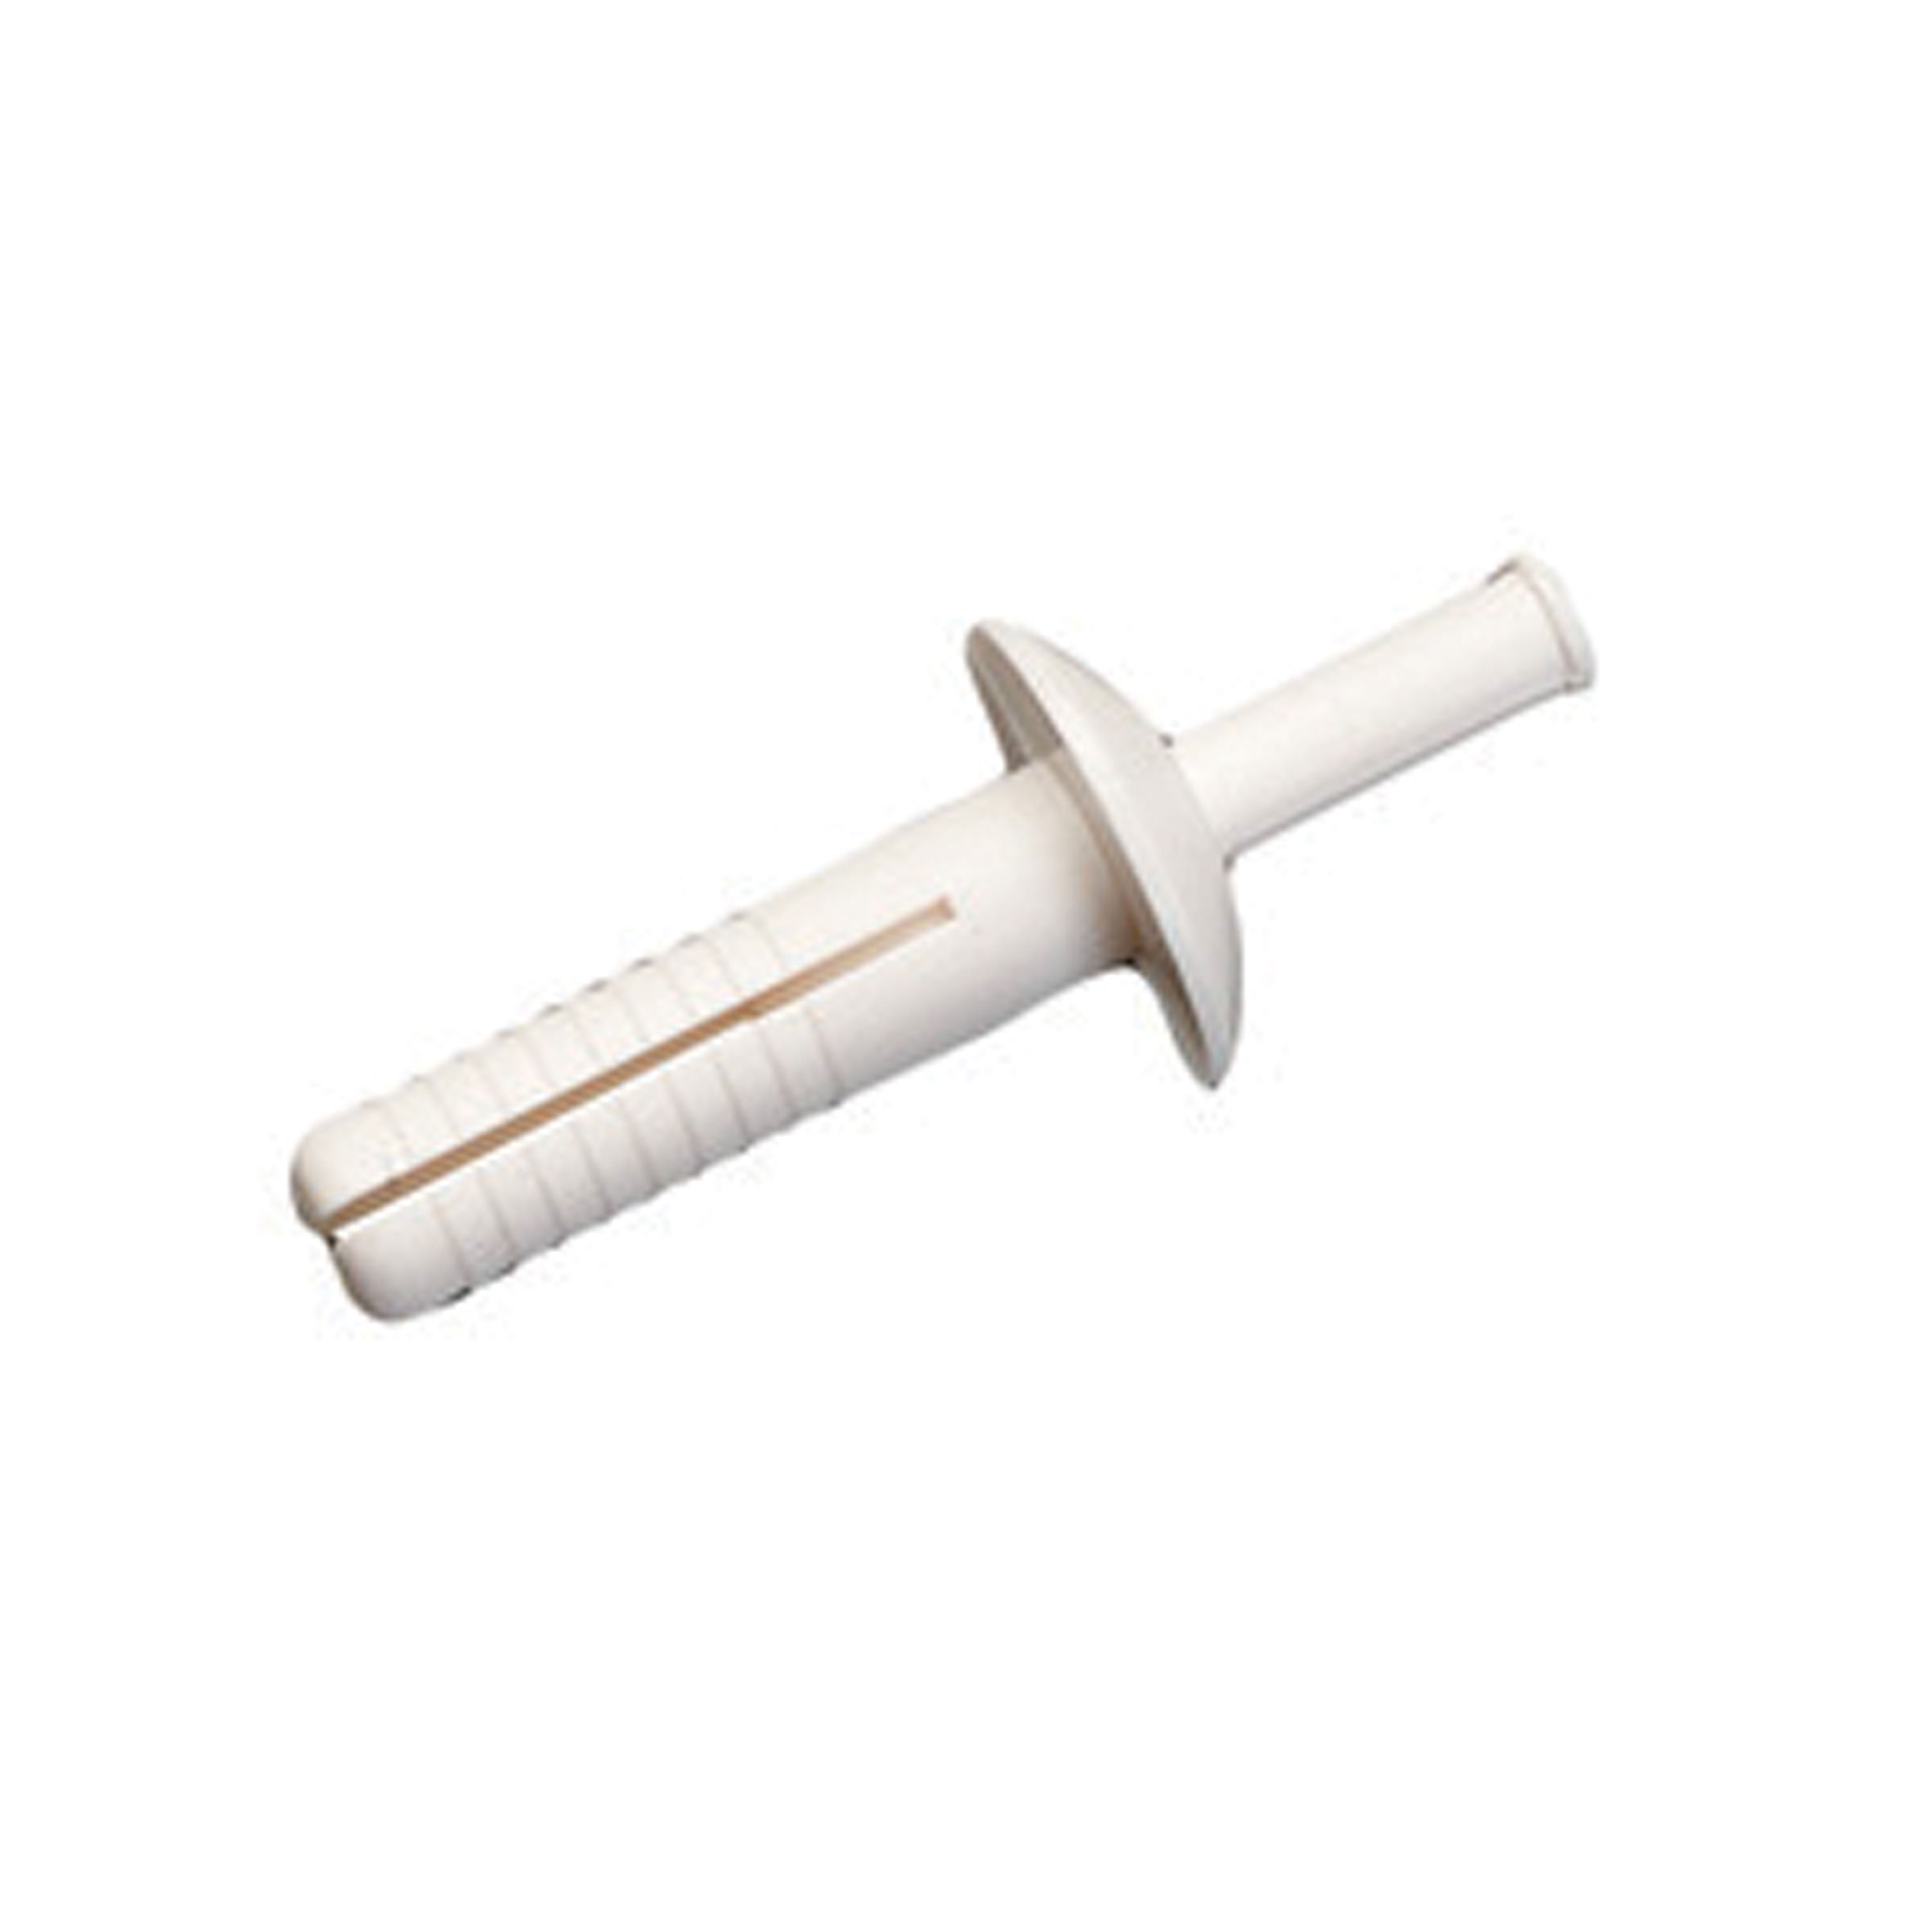 AP Products 013-140 Plastic 1" Rivets - White, Pack of 25